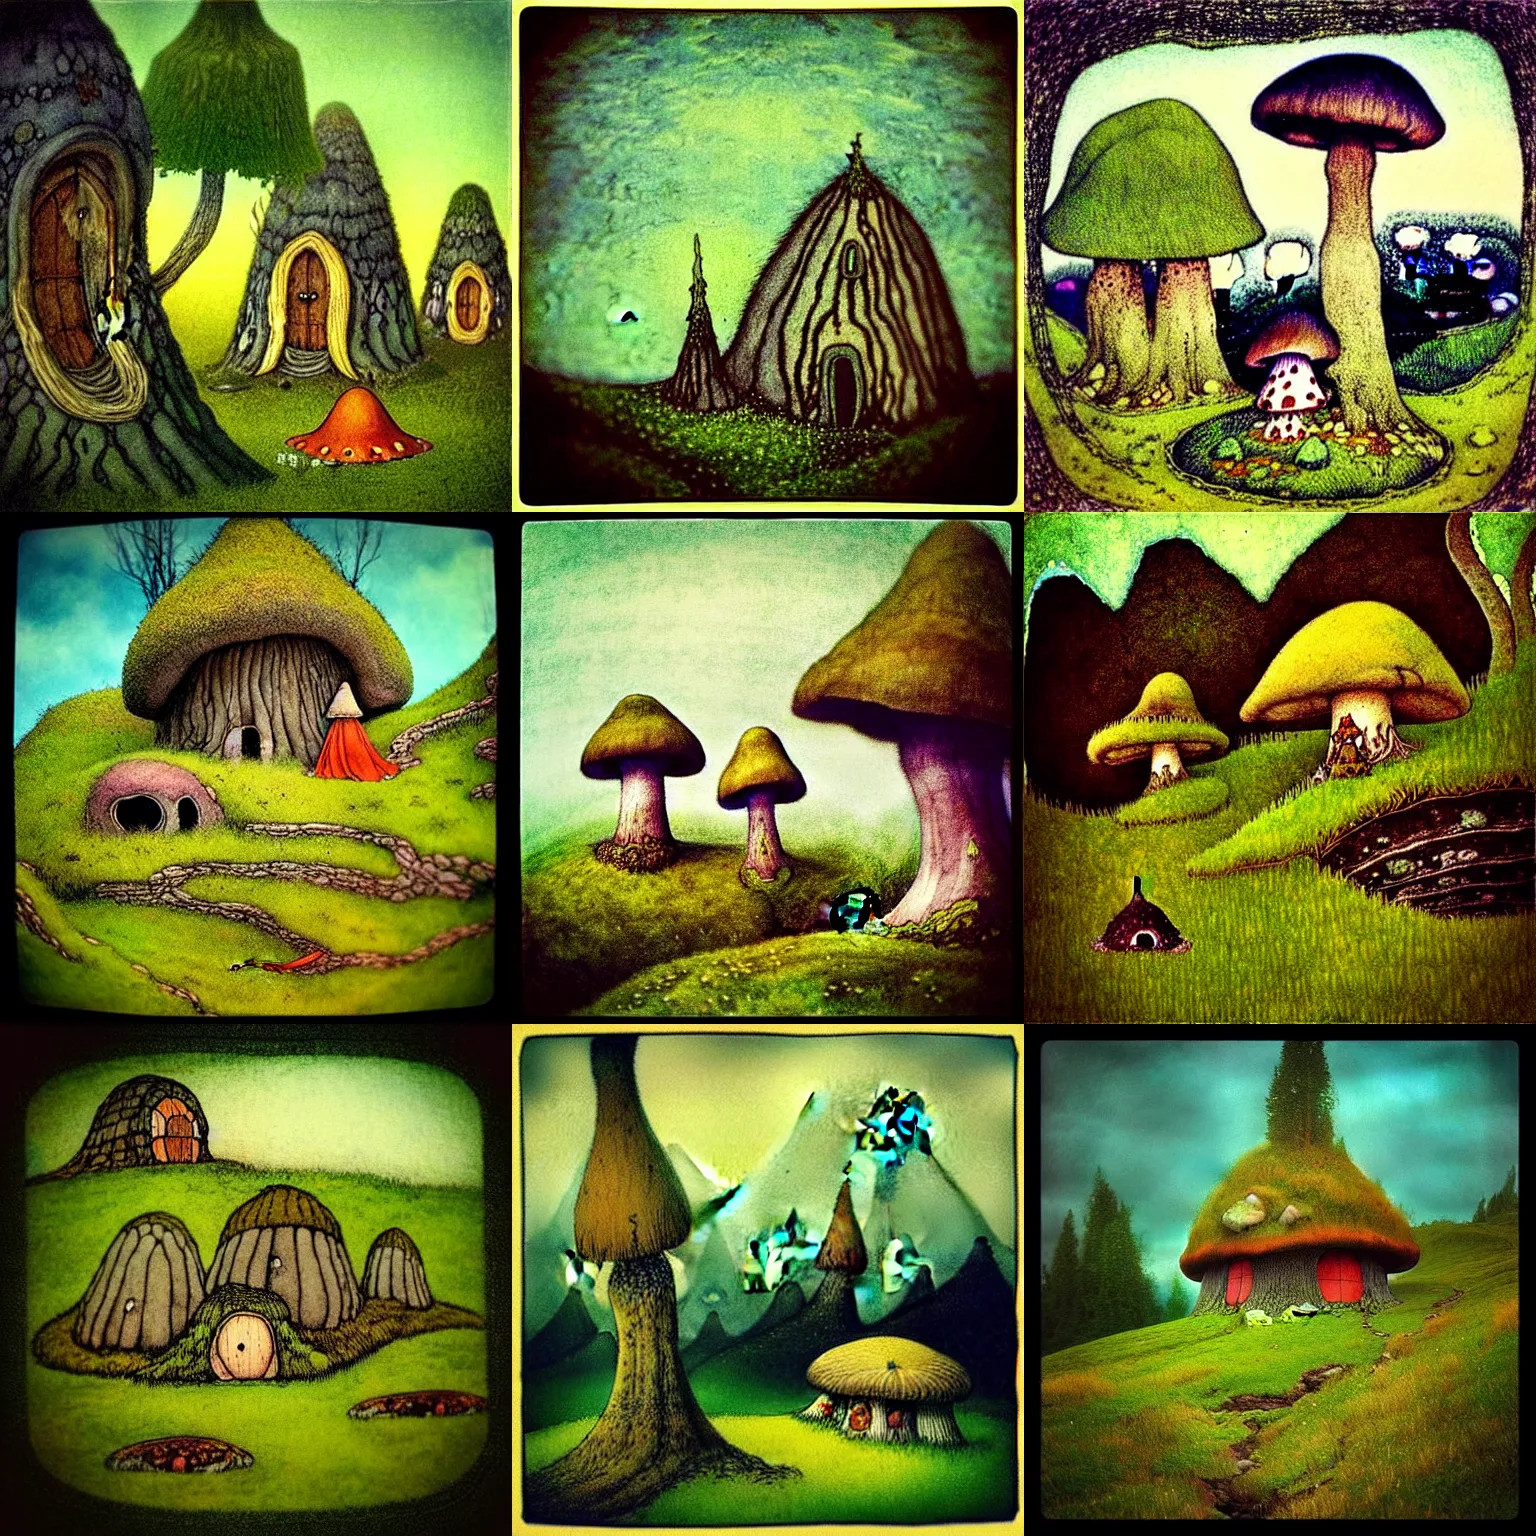 Prompt: “a fairytale landscape with troll creatures and mushroom houses, in the style of John Bauer and wimmelbilderbuch”